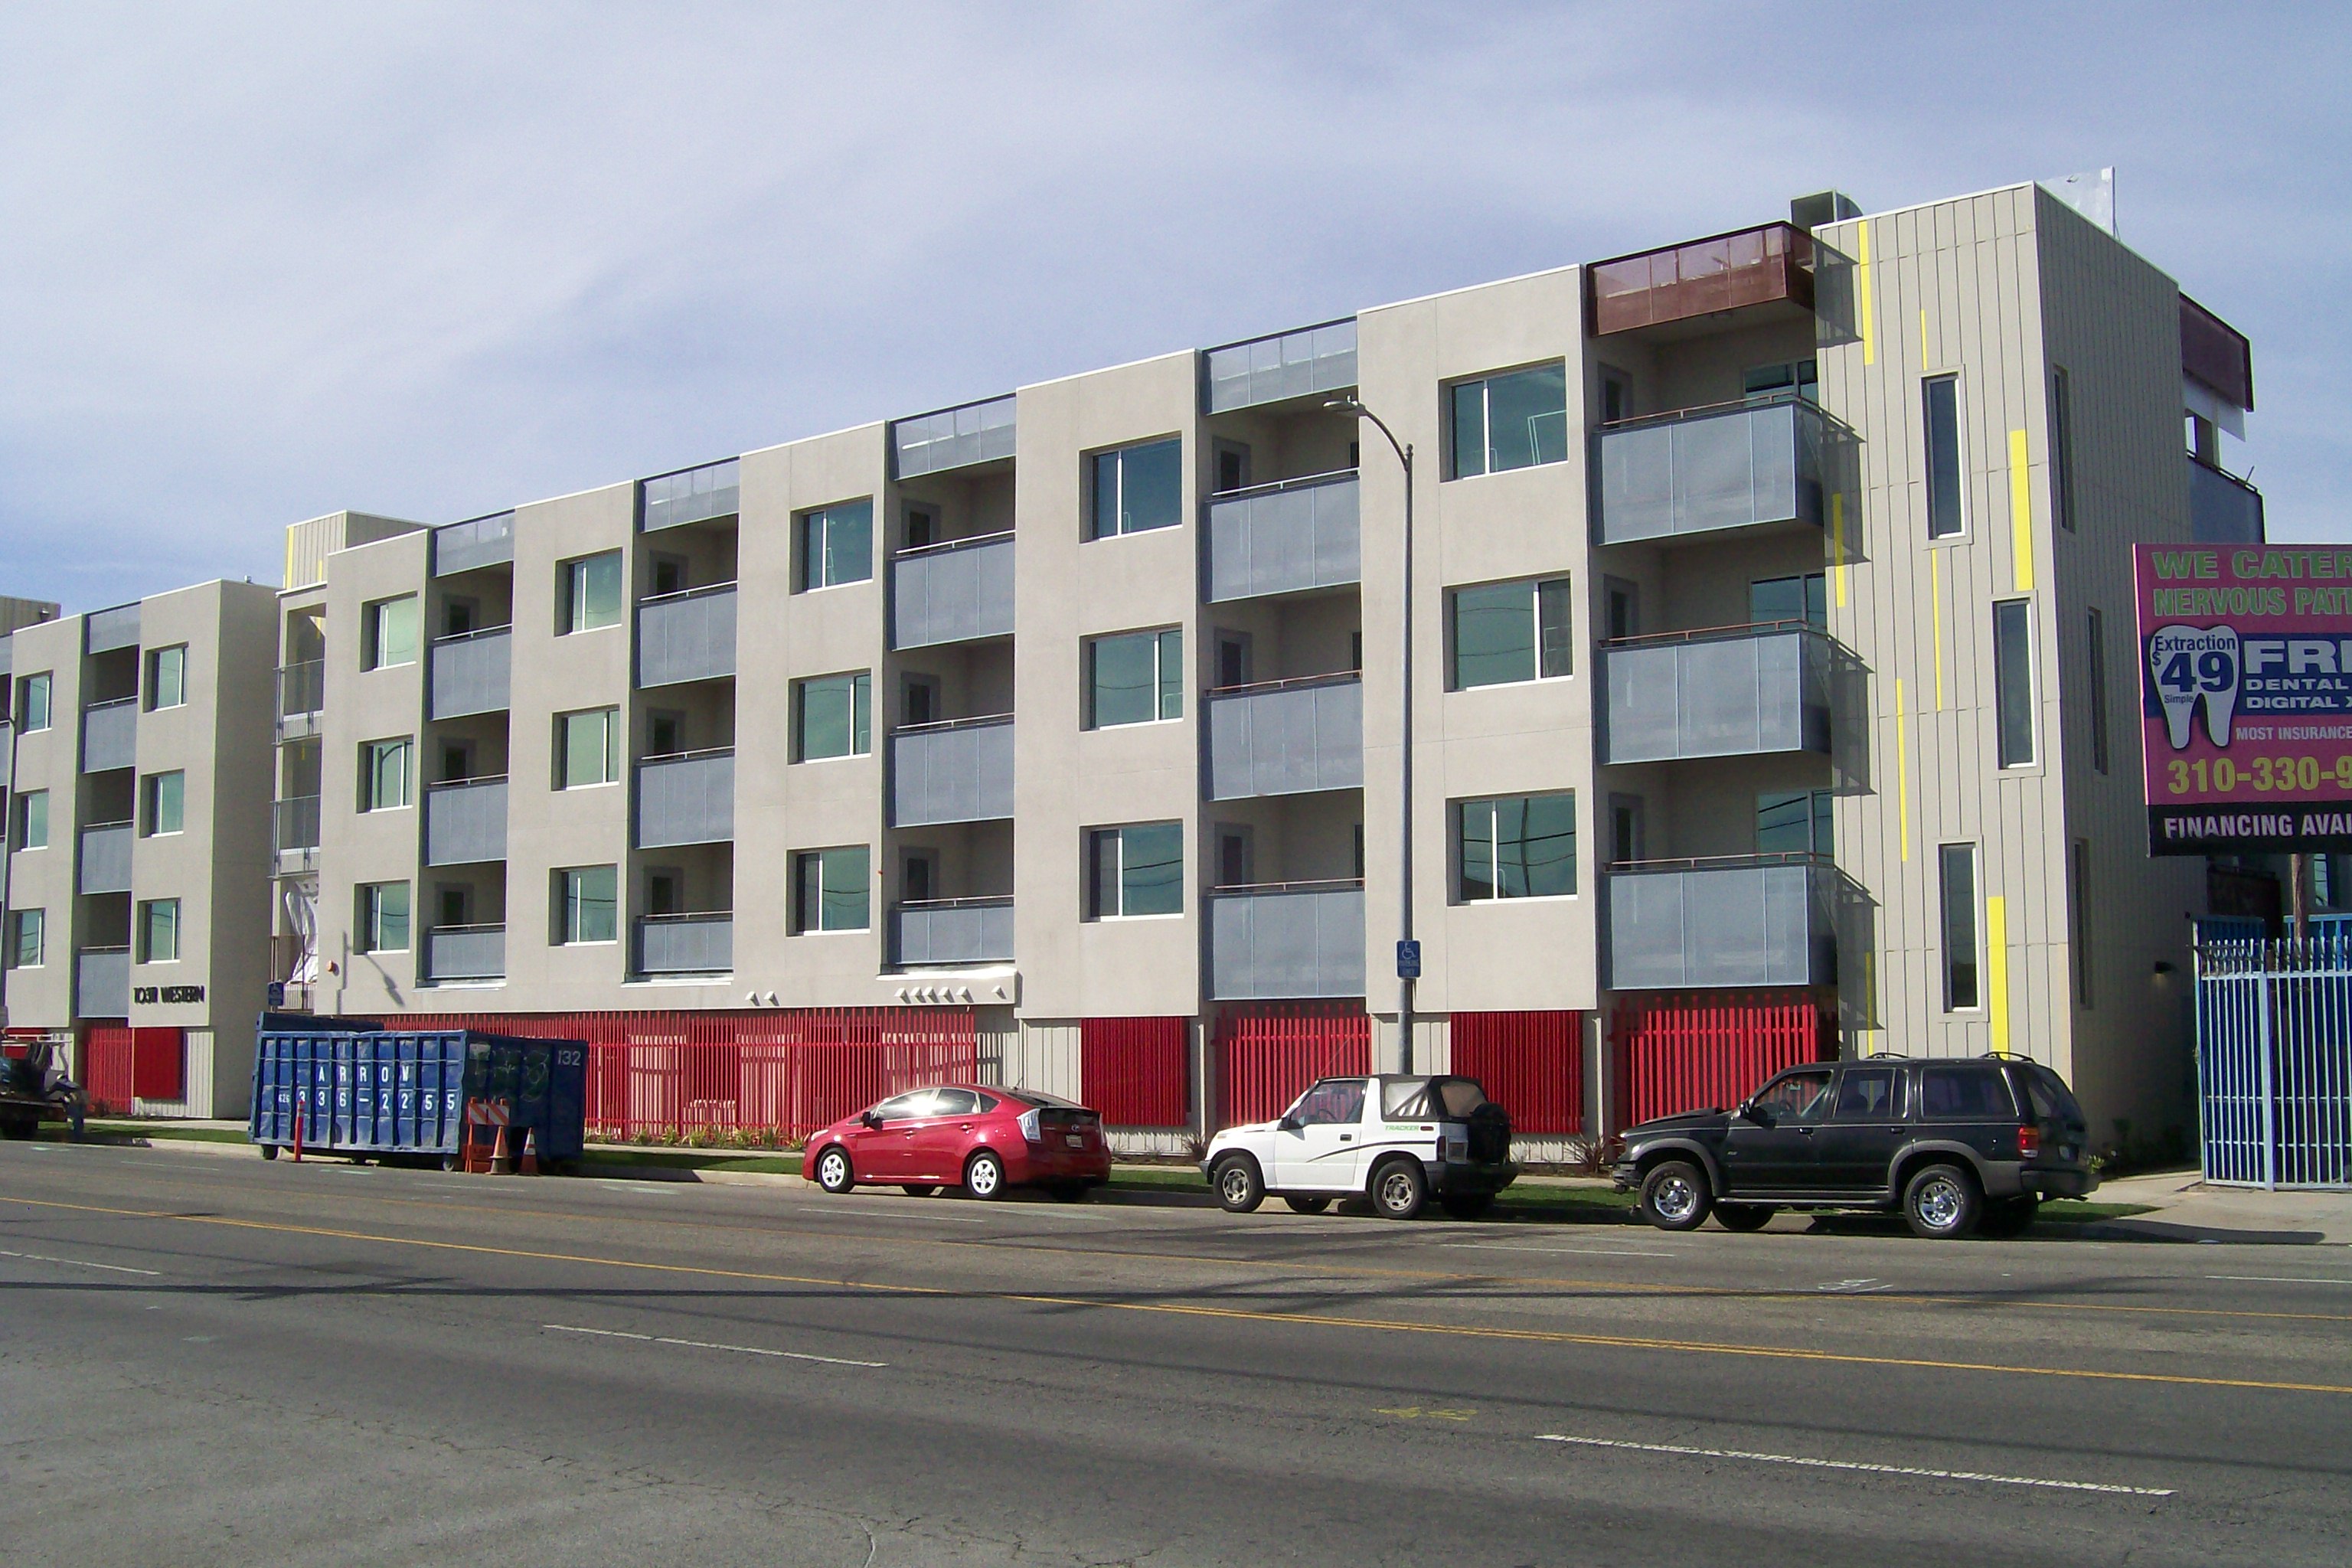 Side view of a modern colorful three story building,red gate, multiple windows, parked cars, big blue portable storage container with orange traffic cones, a handicap parking sign, light pole.